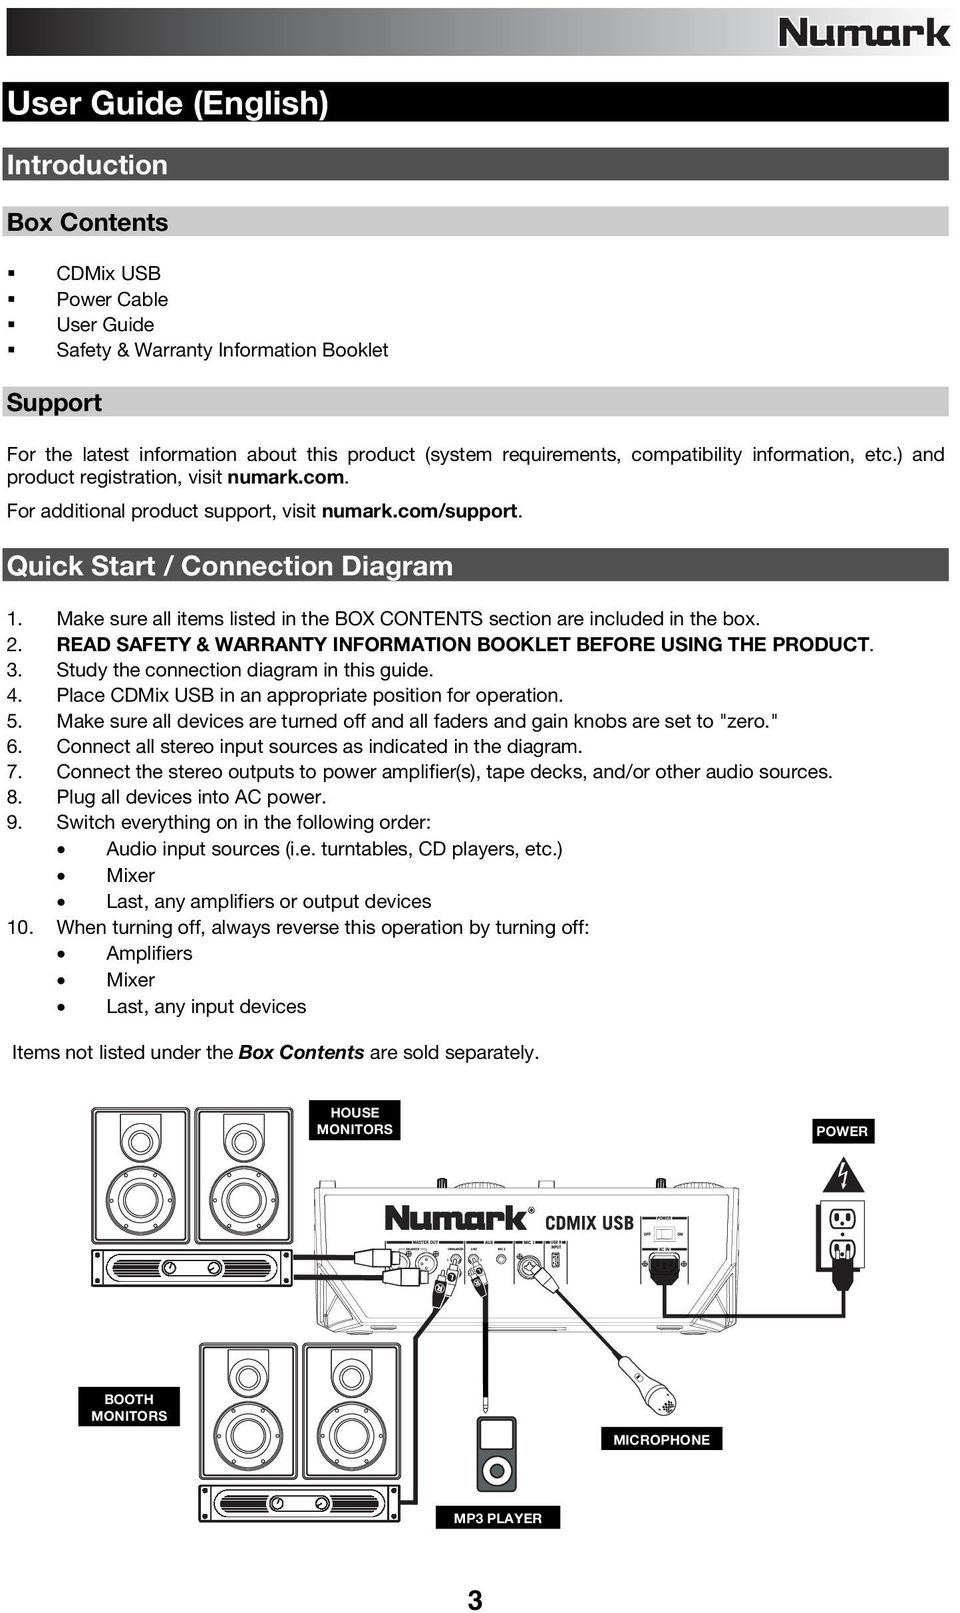 Make sure all items listed in the BOX CONTENTS section are included in the box. 2. READ SAFETY & WARRANTY INFORMATION BOOKLET BEFORE USING THE PRODUCT. 3. Study the connection diagram in this guide.